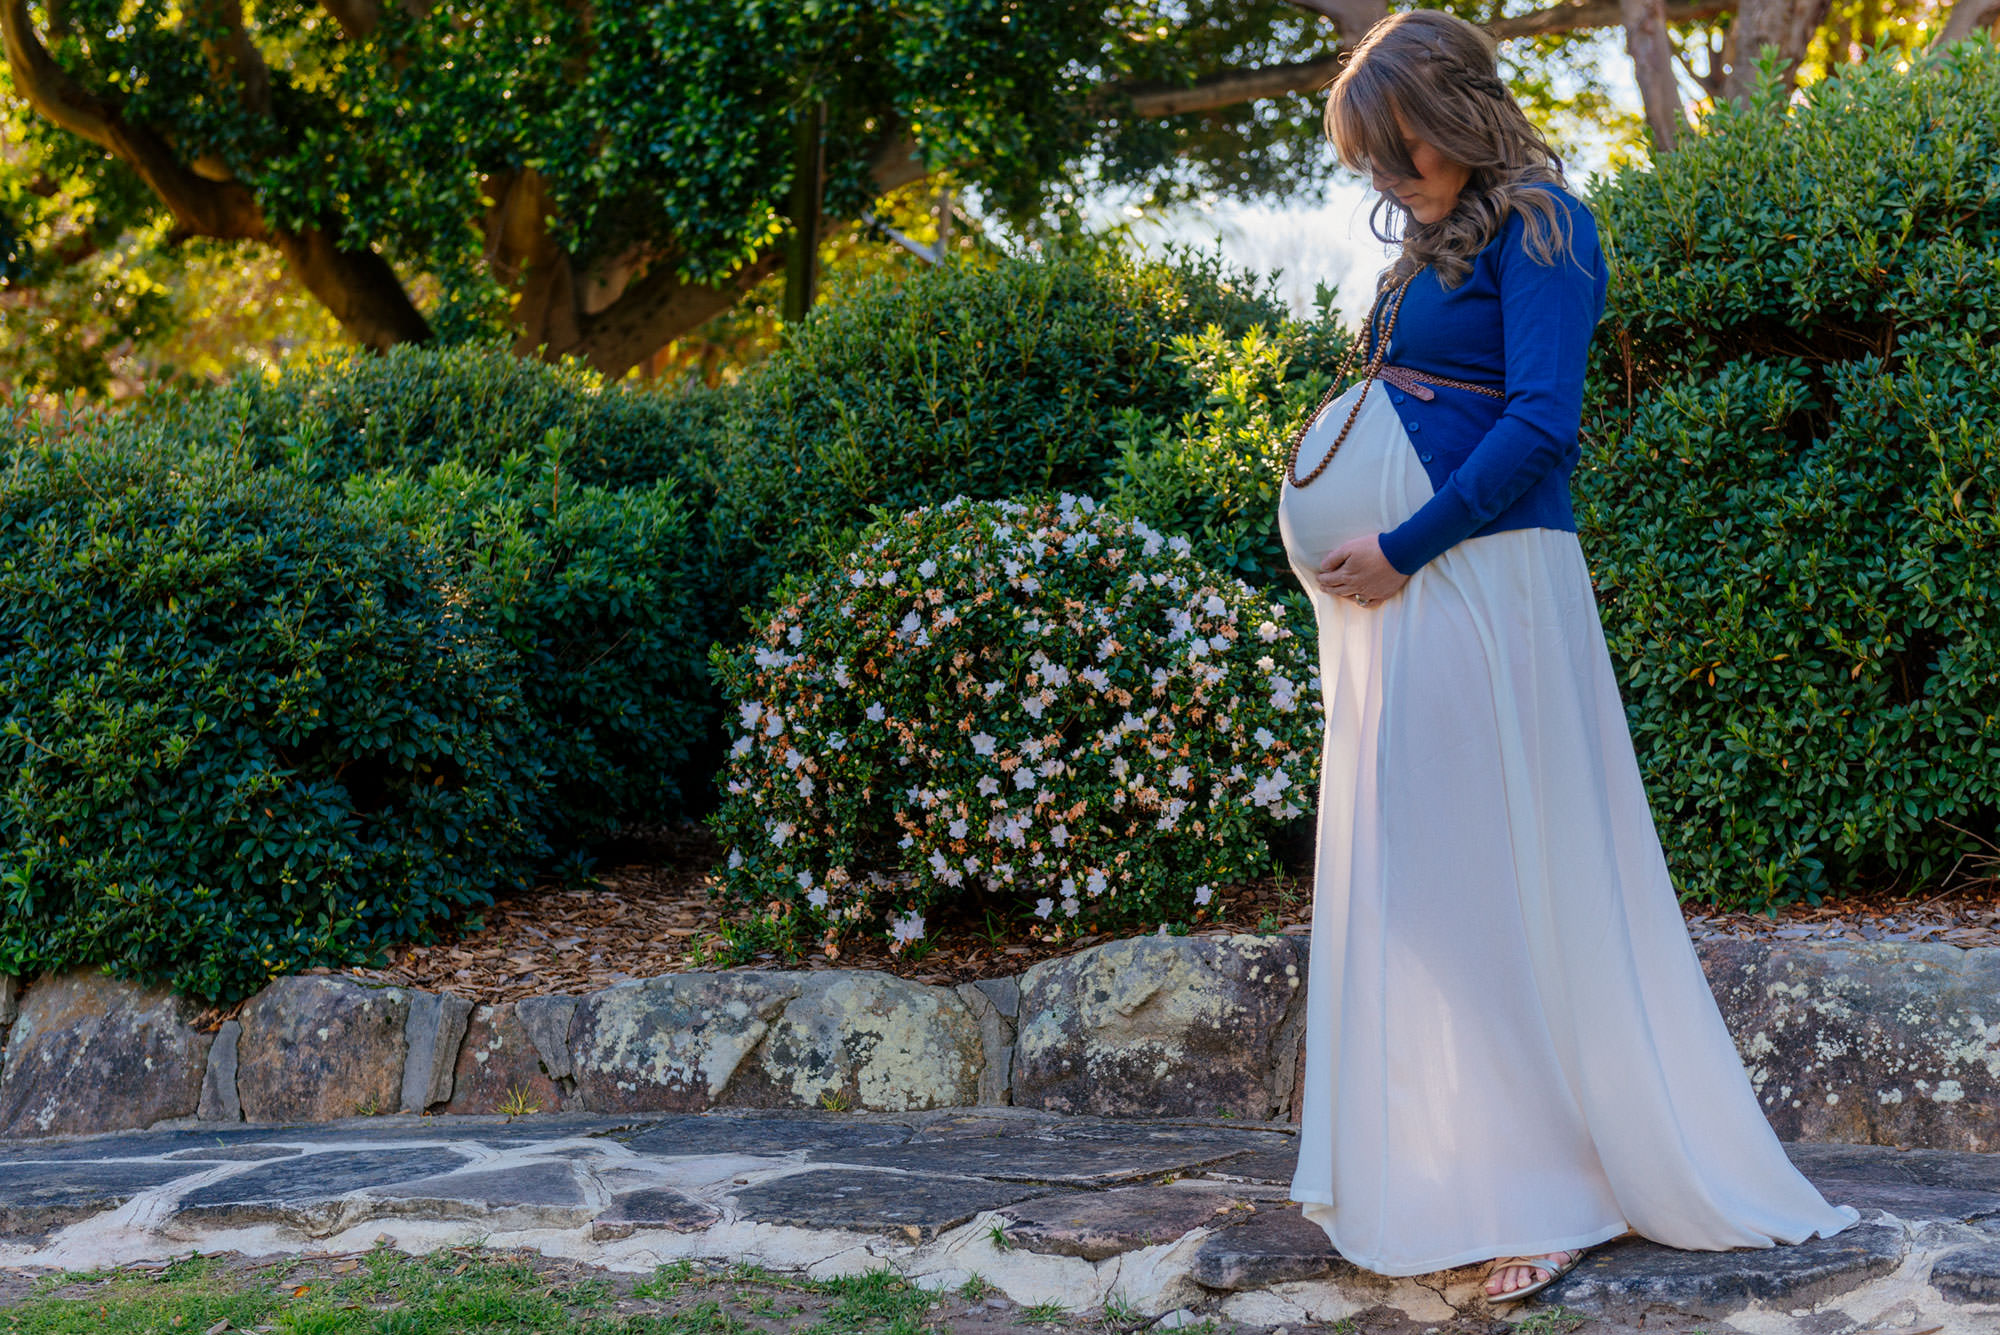 Cradling her baby bump in Wahroonga Park